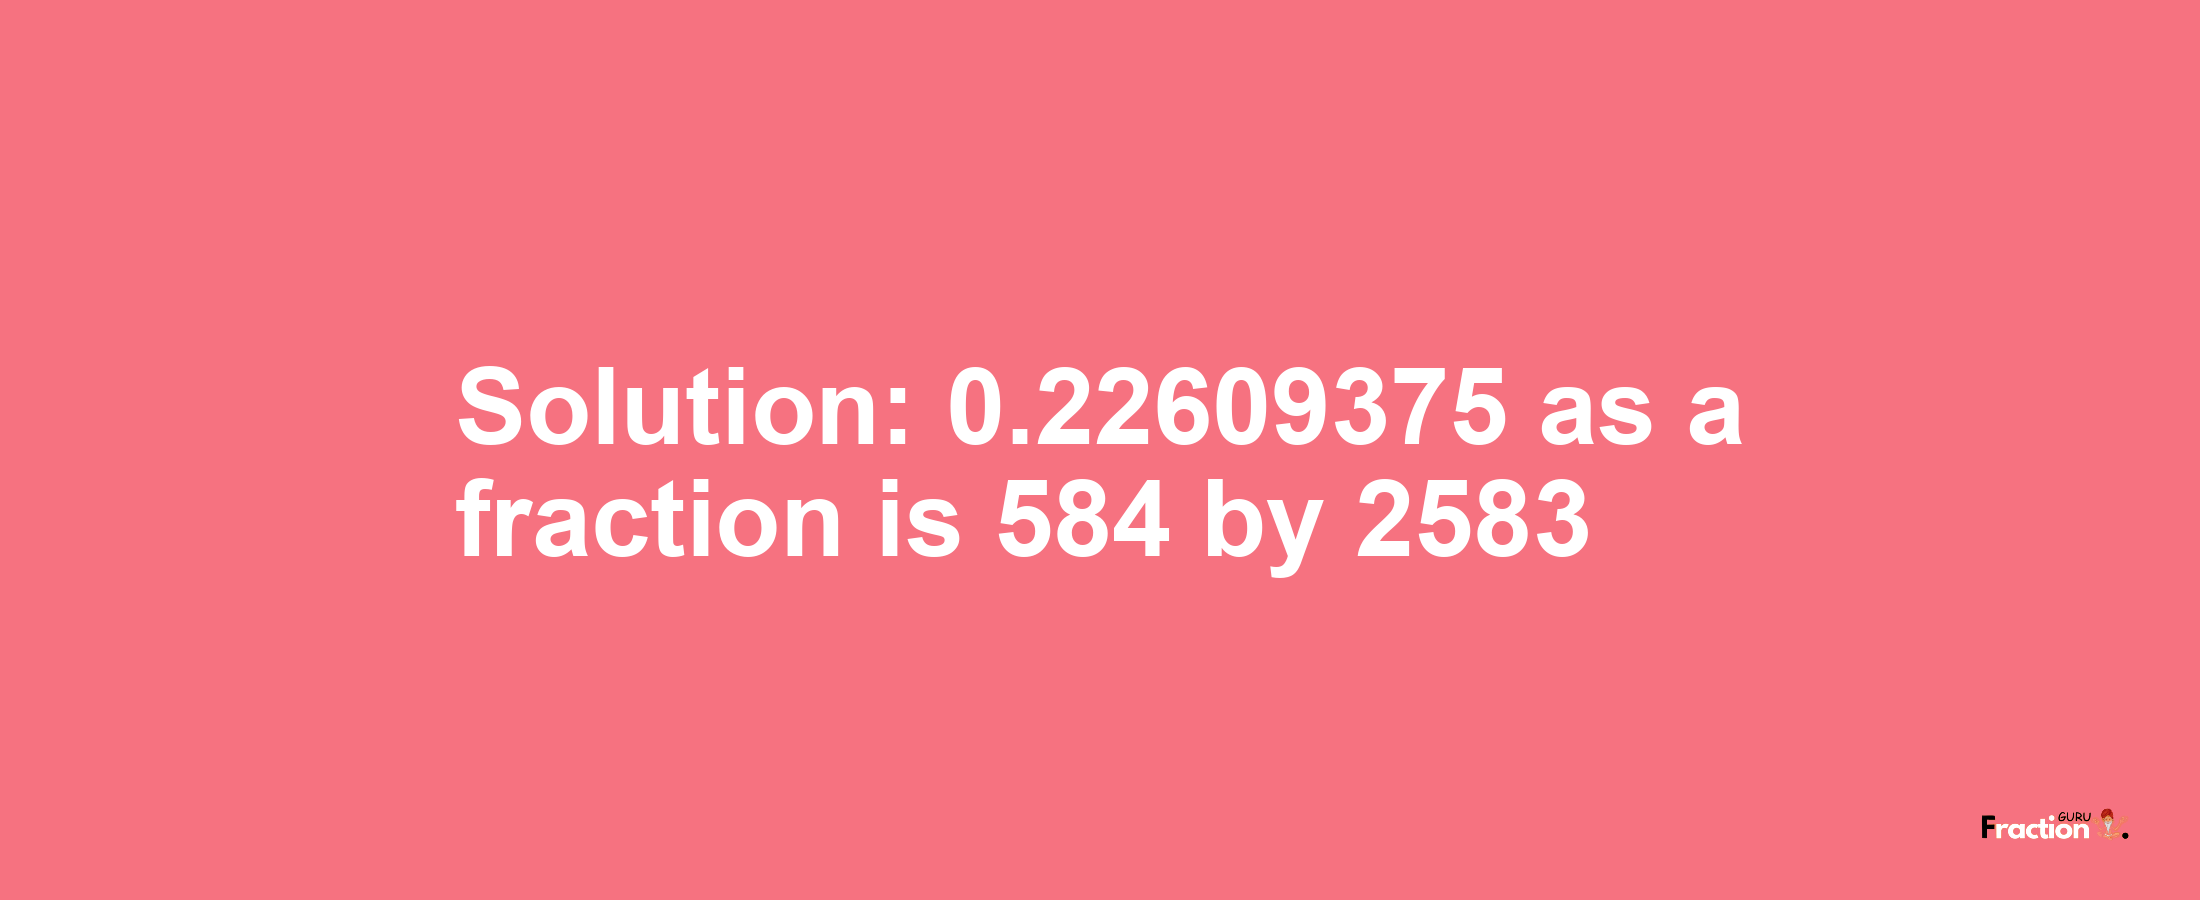 Solution:0.22609375 as a fraction is 584/2583